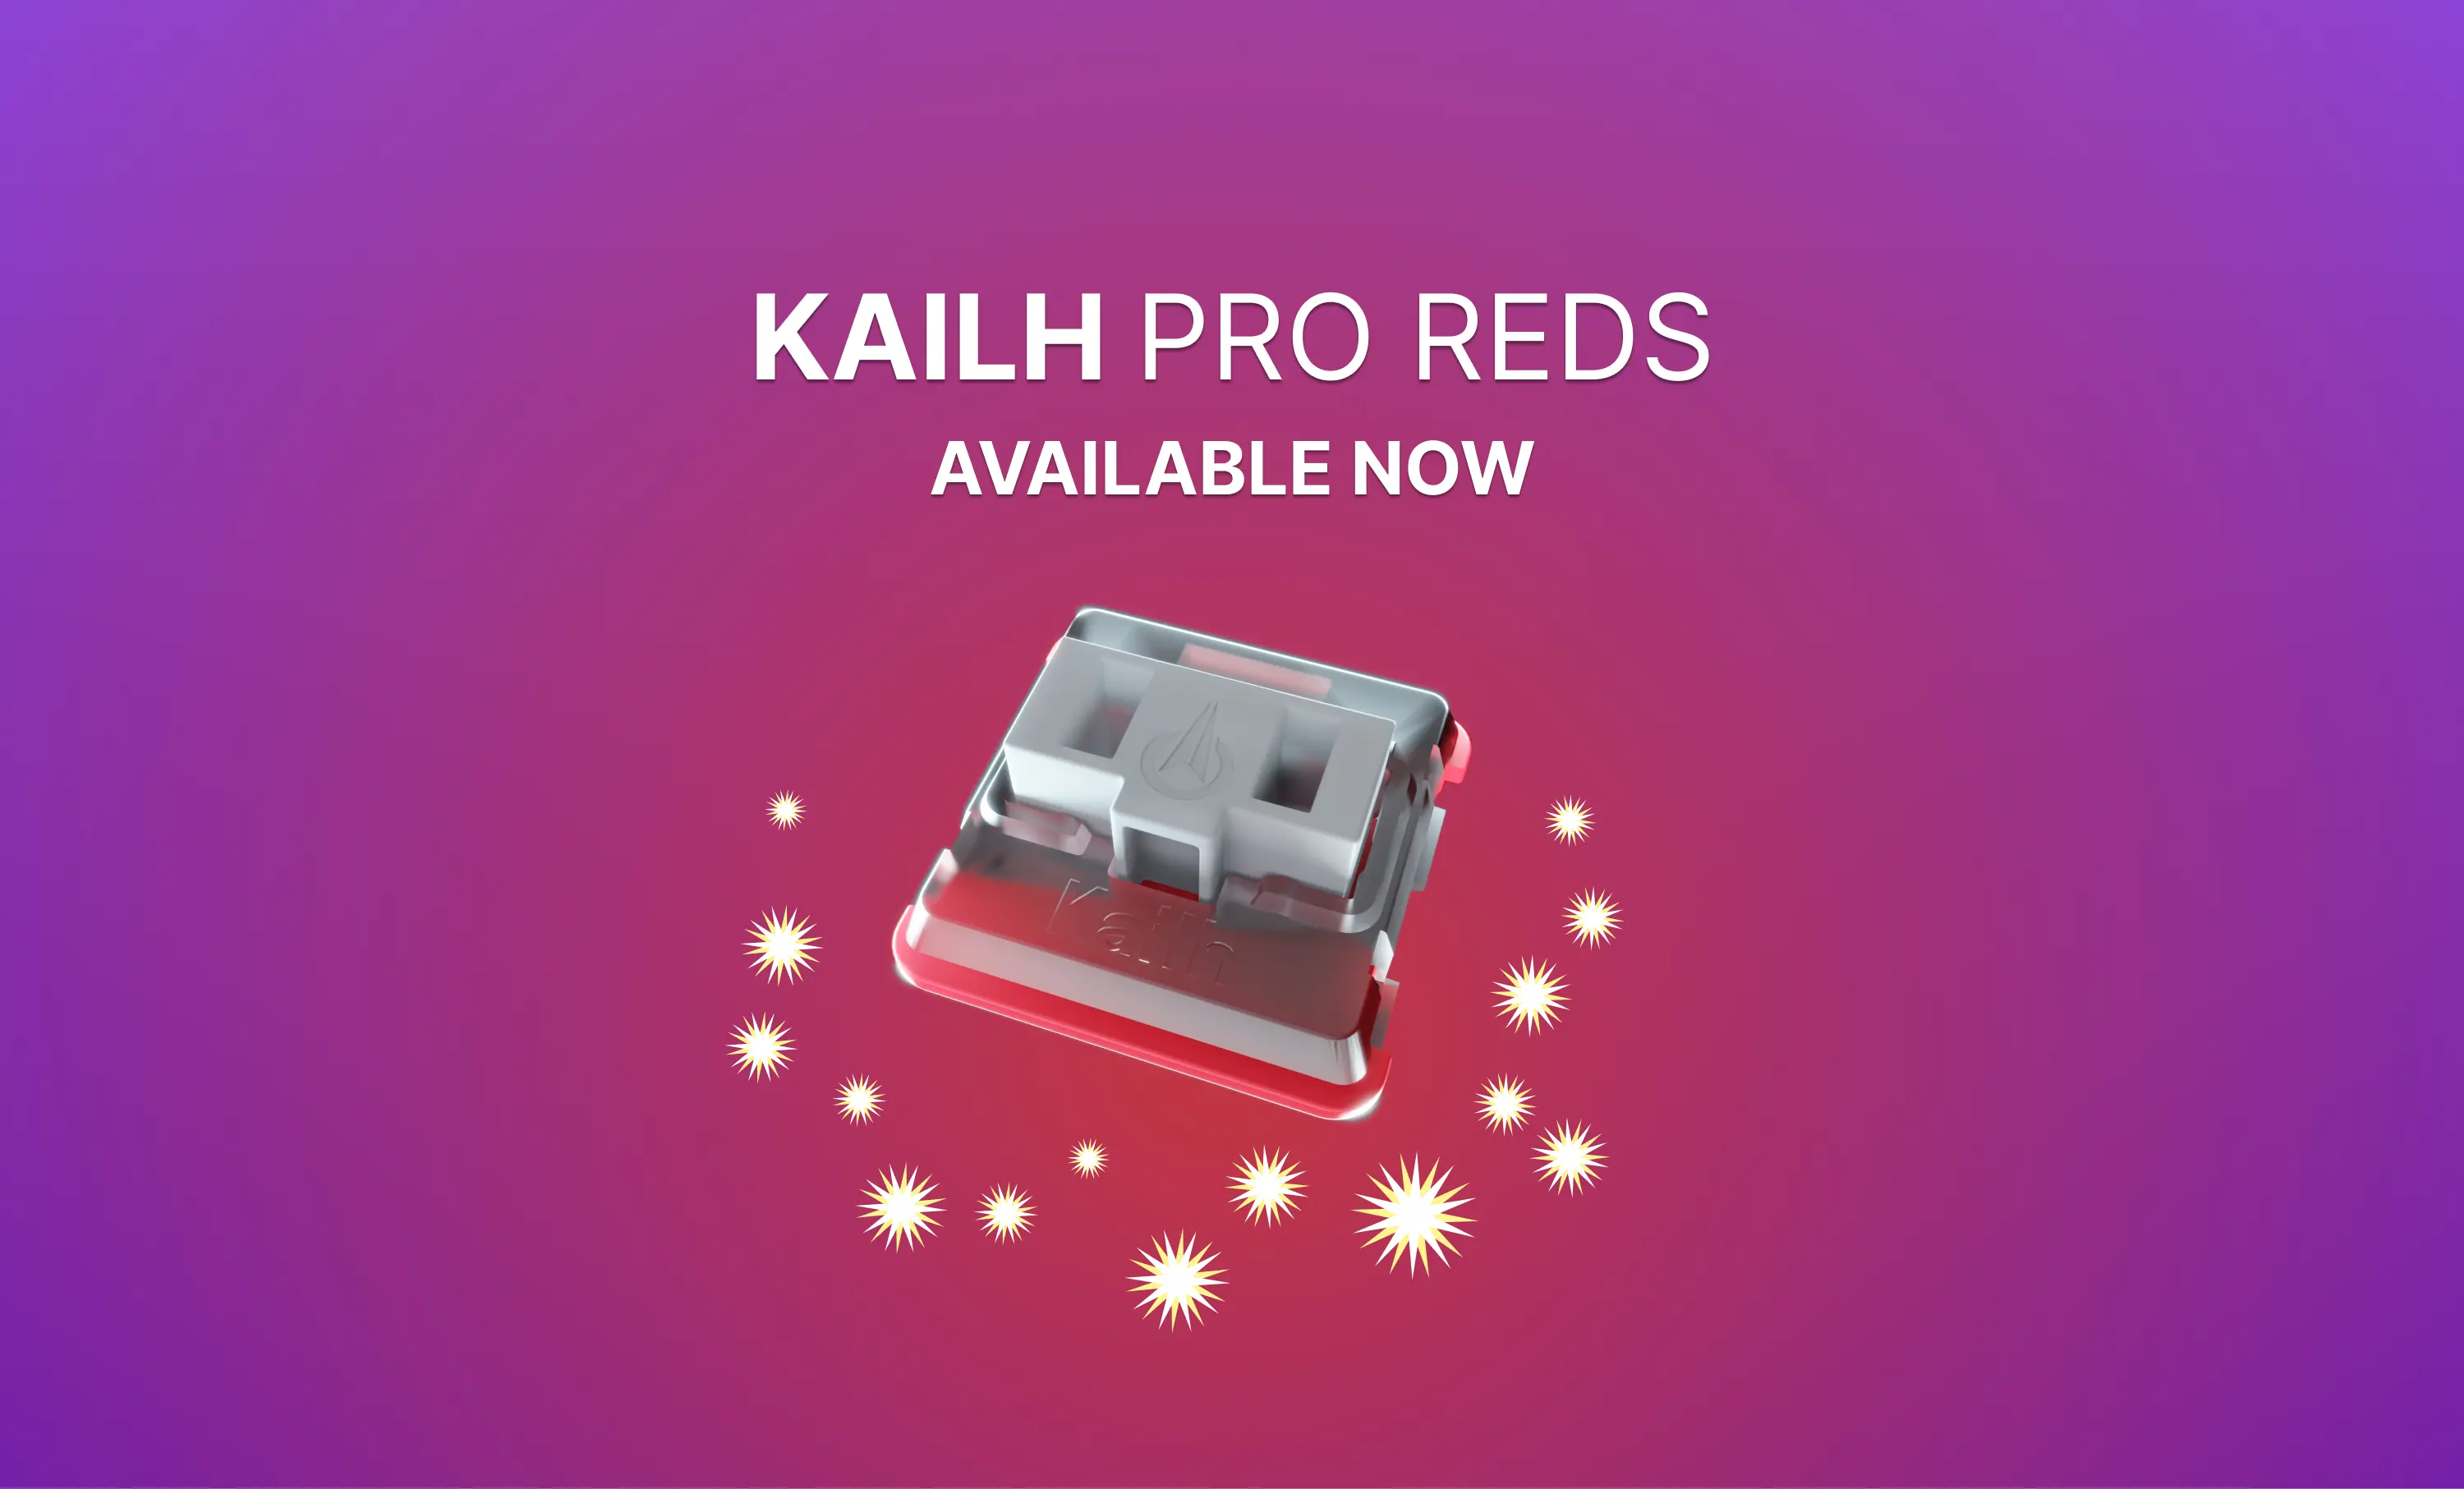 Introducing: Kailh Pro Red